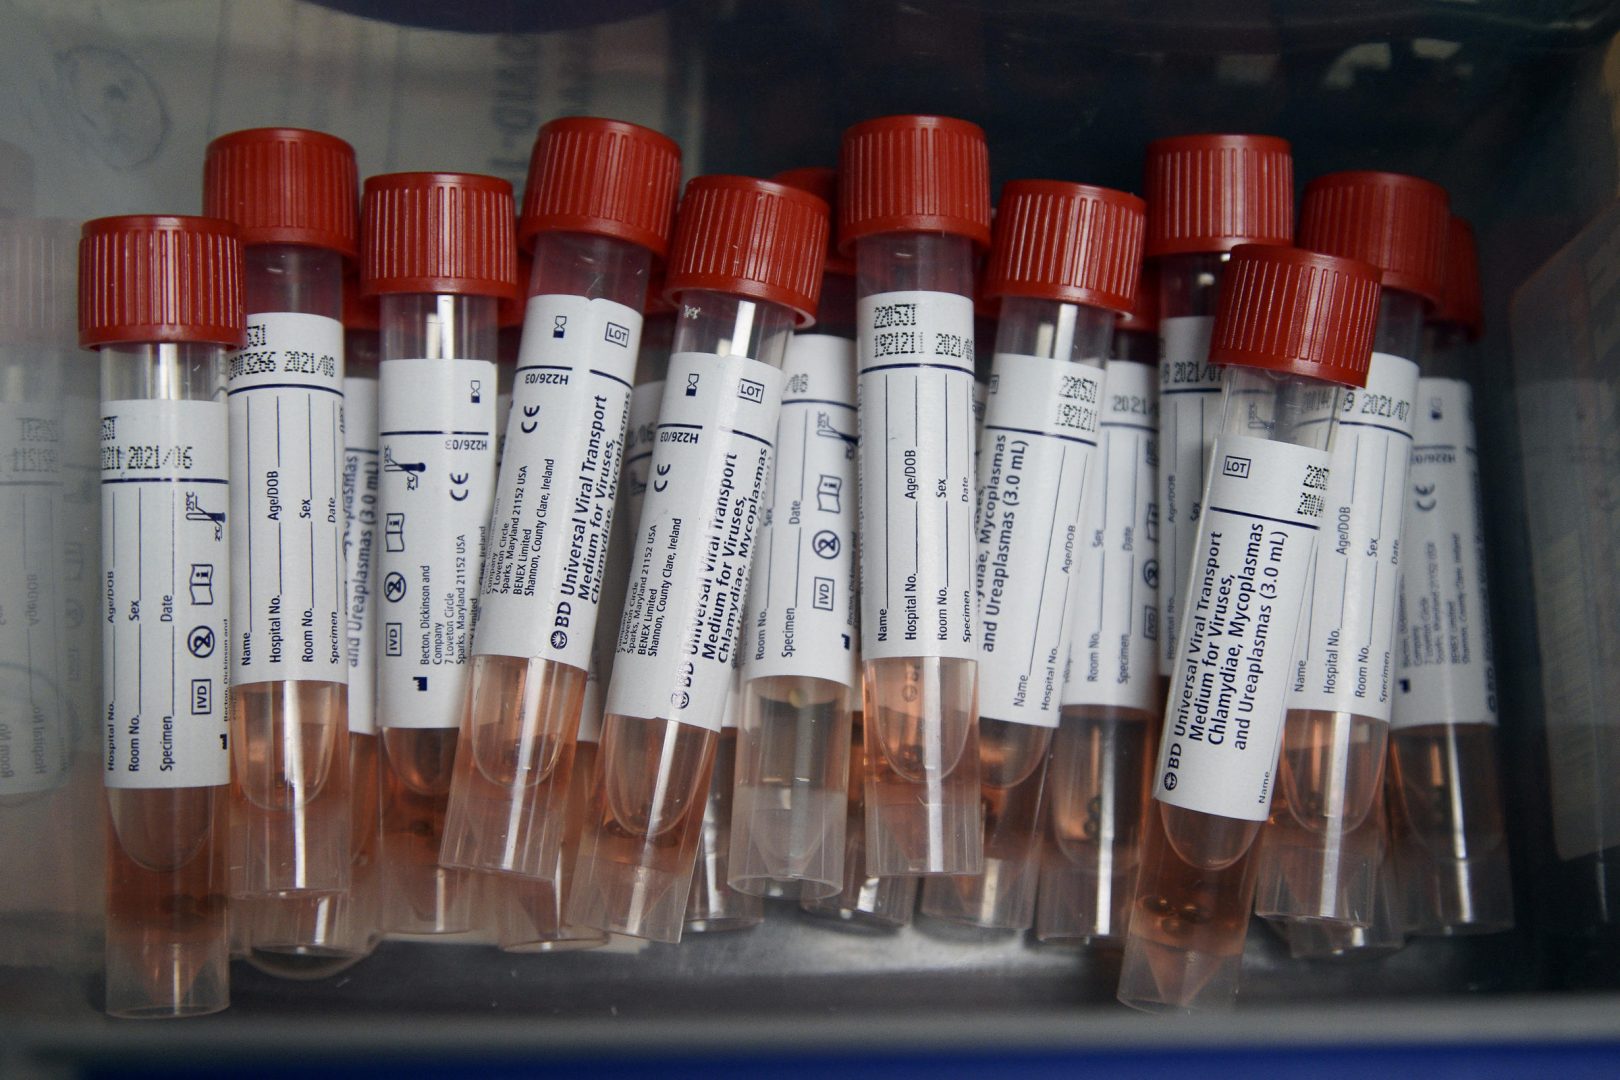 Vials used in the test to detect the presence of COVID-19 are seen at a testing site affiliated with the Methodist Health System, in Omaha, Neb., Friday, April 24, 2020. 